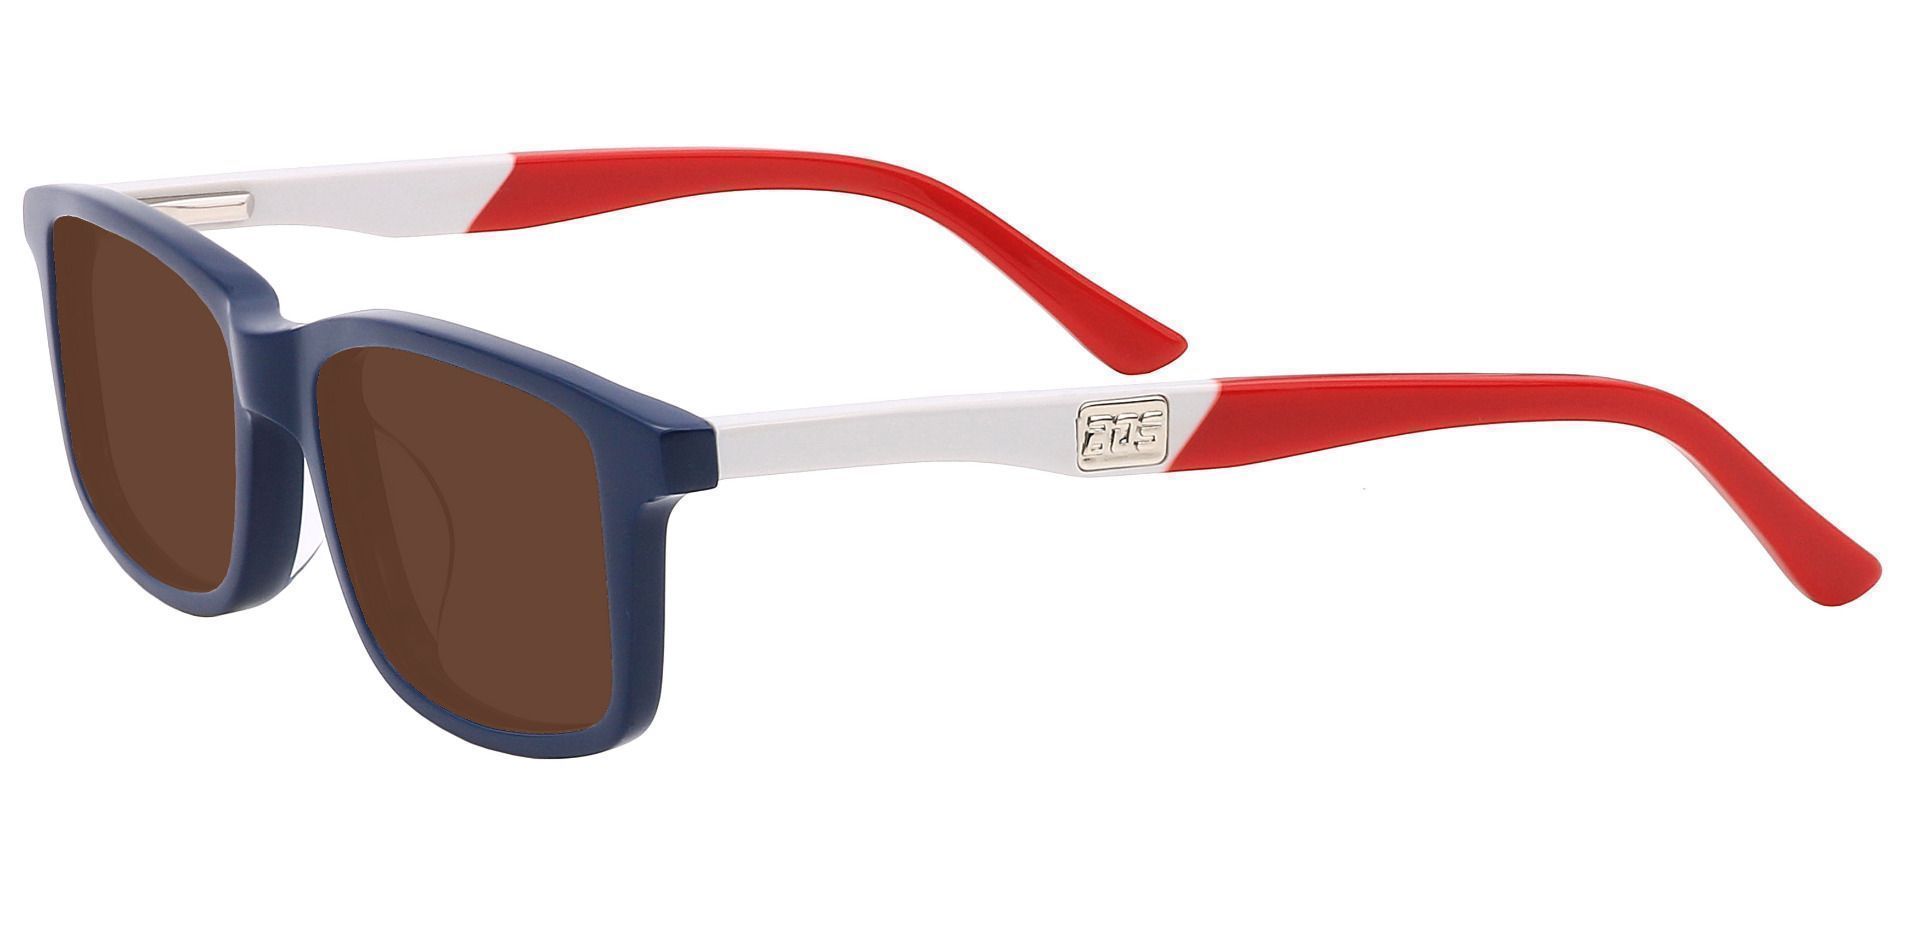 Hub Rectangle Reading Sunglasses - Blue Frame With Brown Lenses